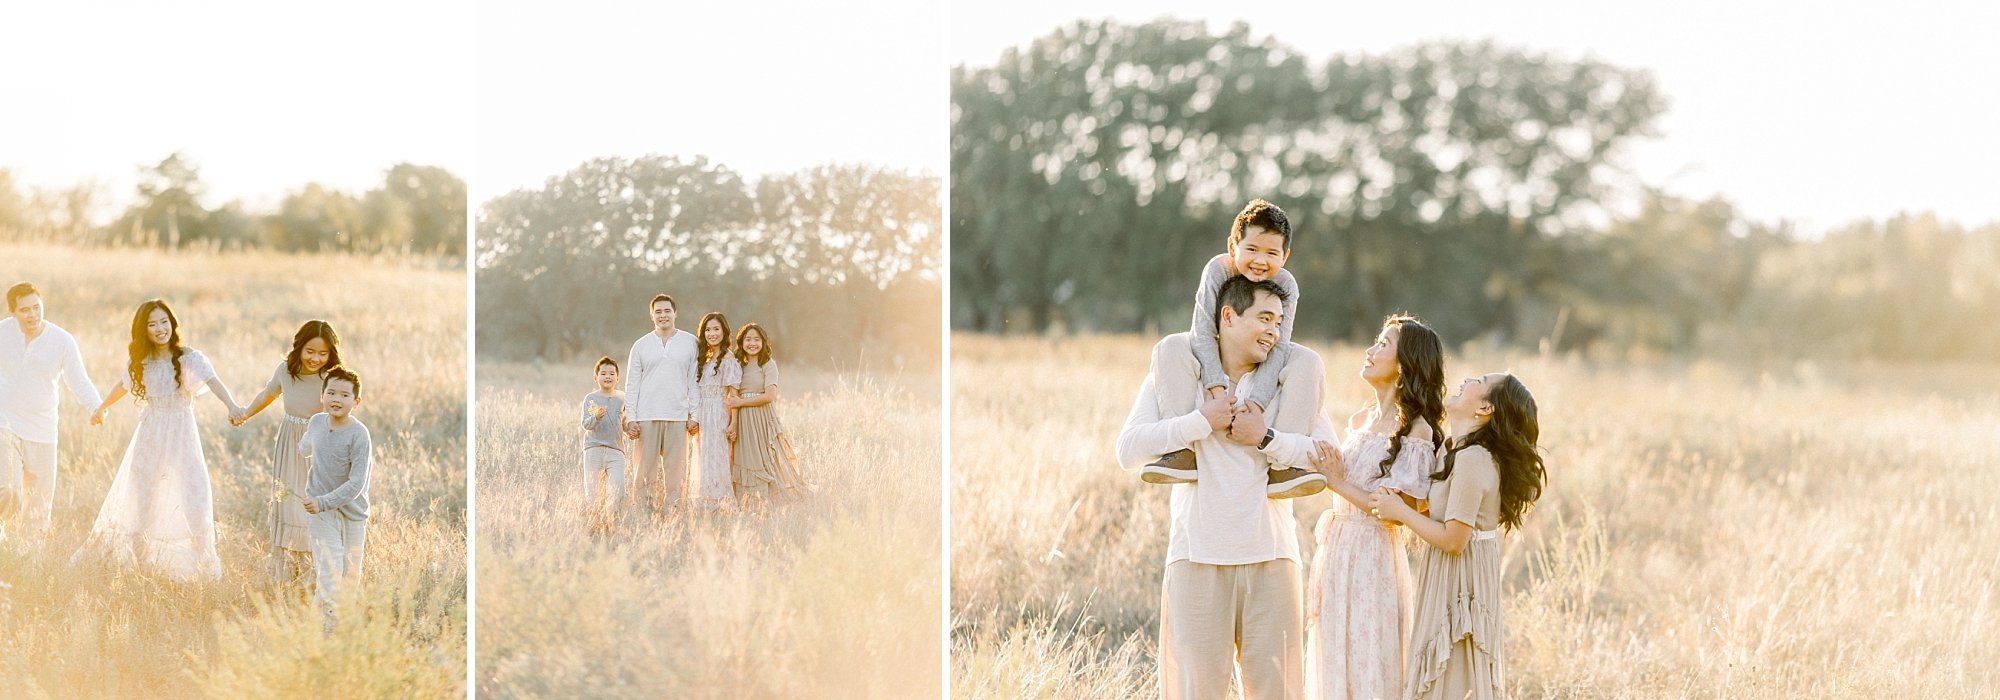 3 Popular Poses for Great Family Photos